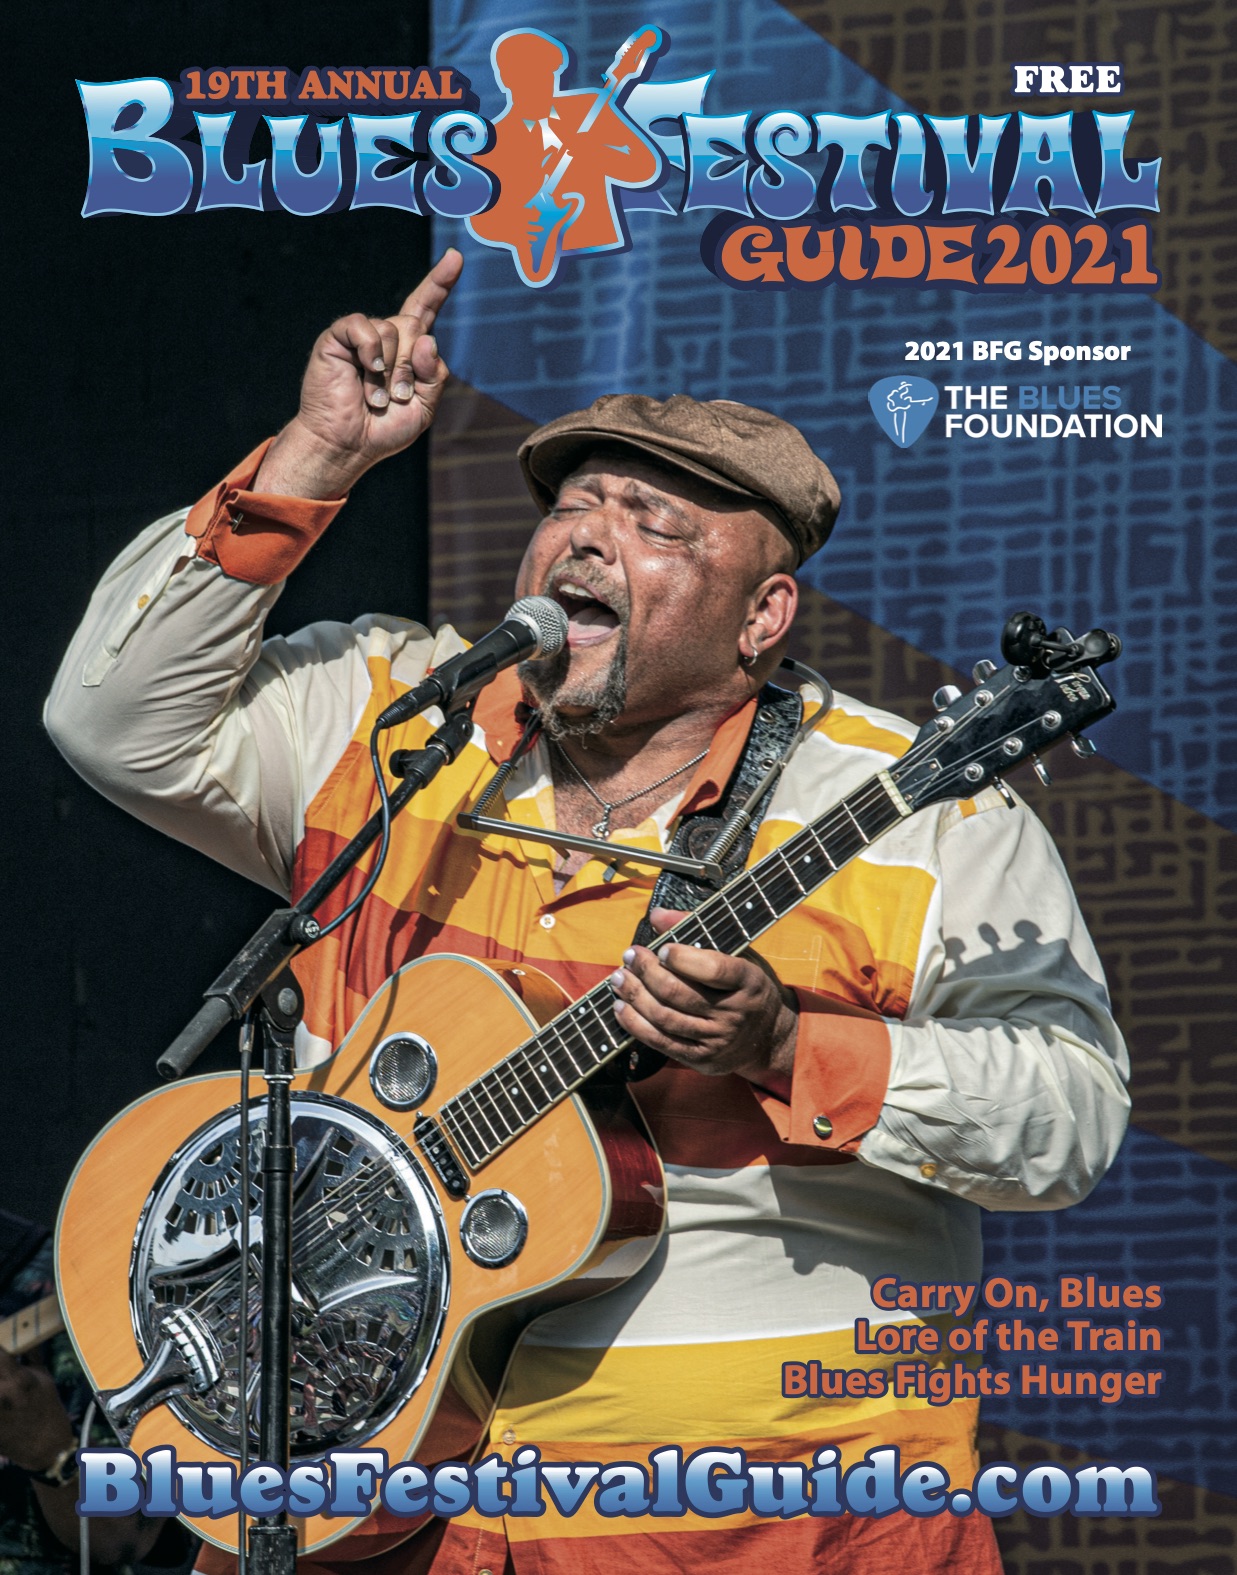 Introducing our 19th Annual Blues Festival Guide Magazine! Blues